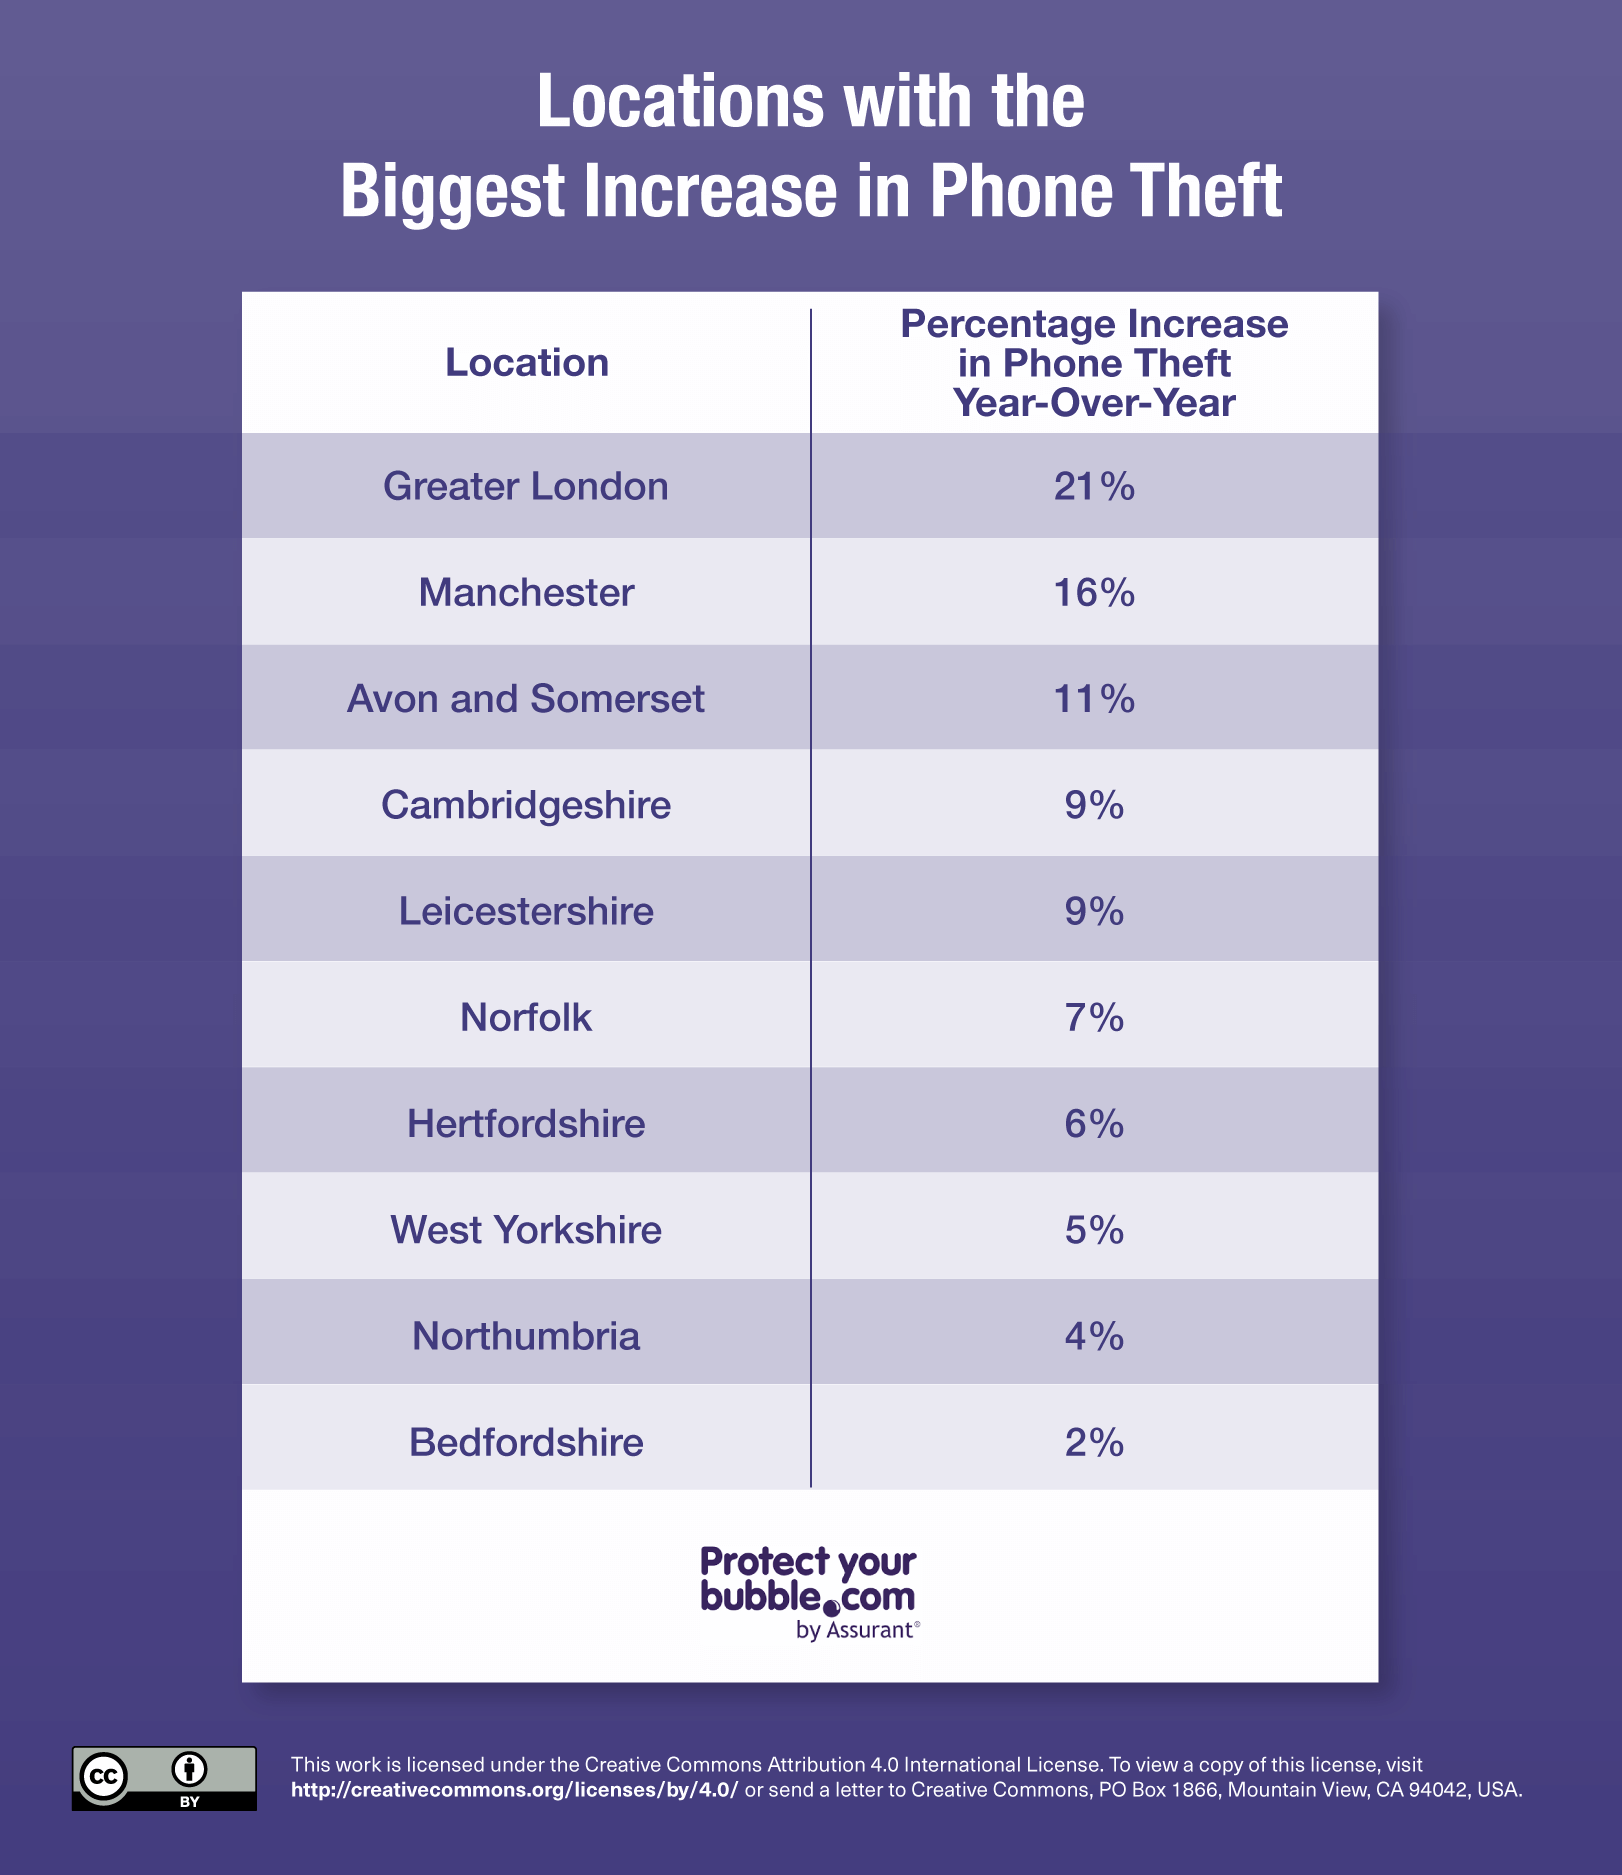 List of the locations with the biggest increase in phone theft in the UK